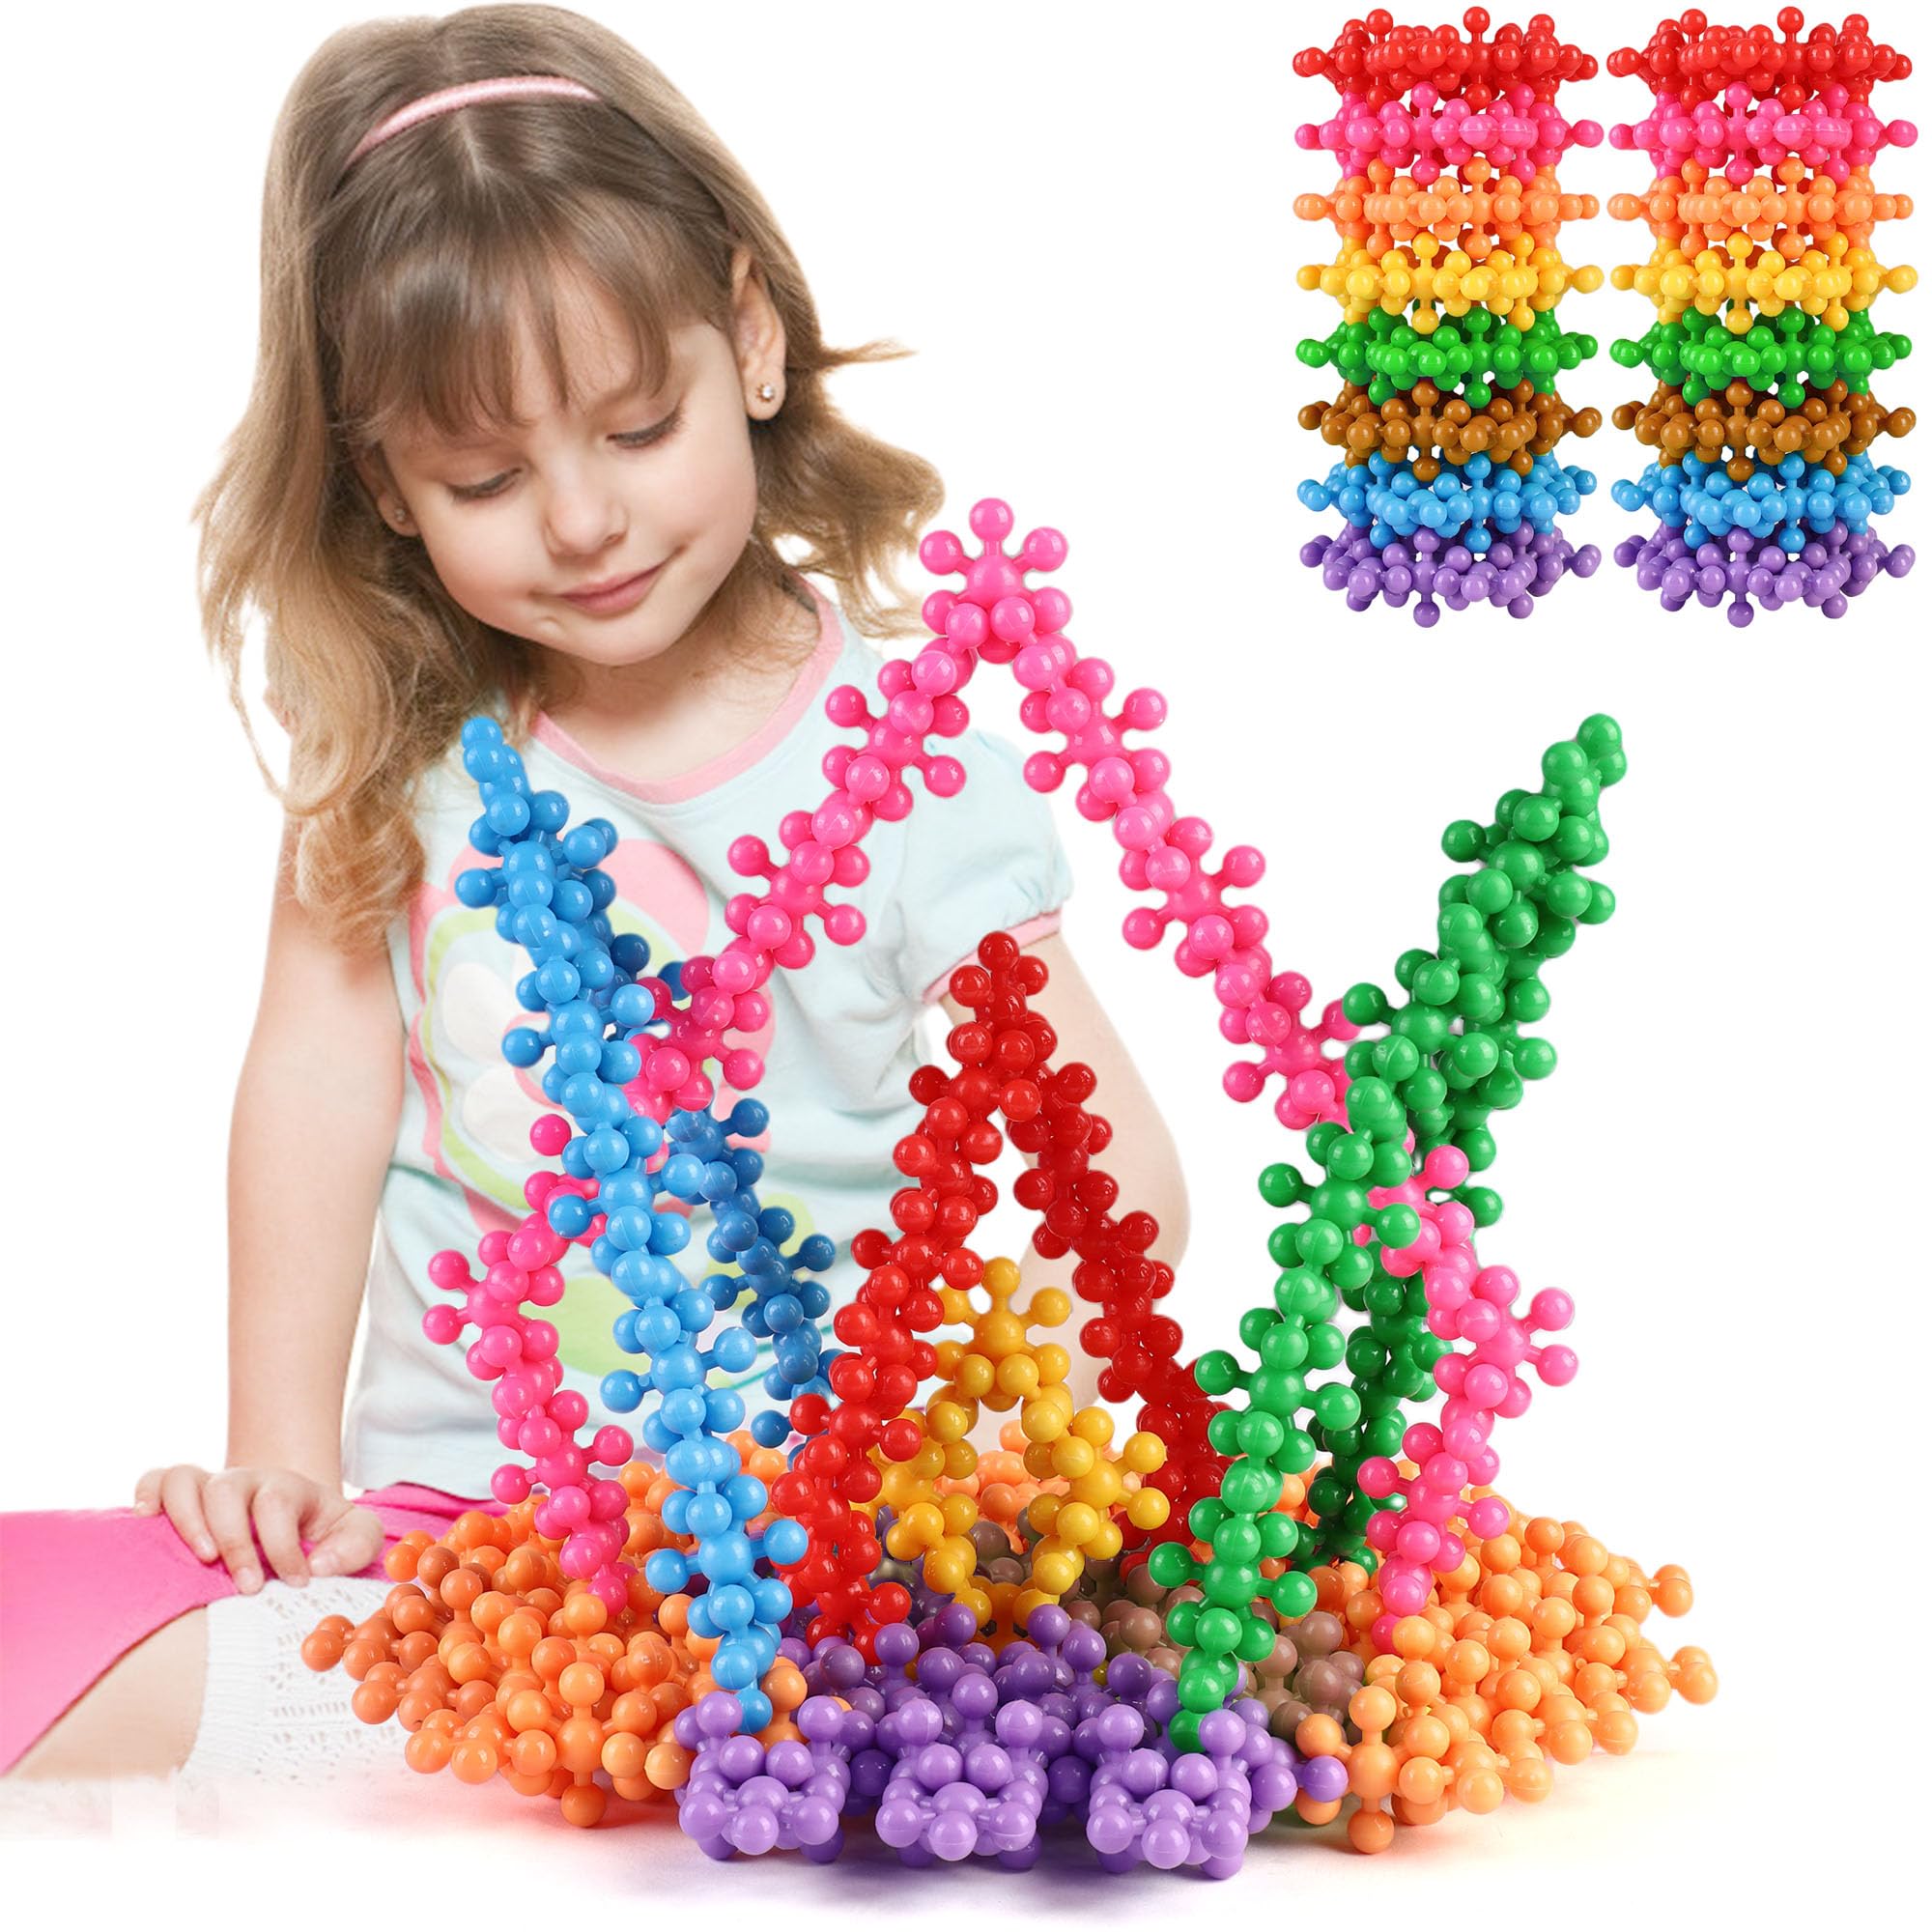 TOMYOU 400 Pieces Building Blocks Kids STEM Toys Educational Building Toys Discs Sets Interlocking Solid Plastic for Preschool Kids Boys and Girls Aged 3+, Safe Material Creativity Kids Toys